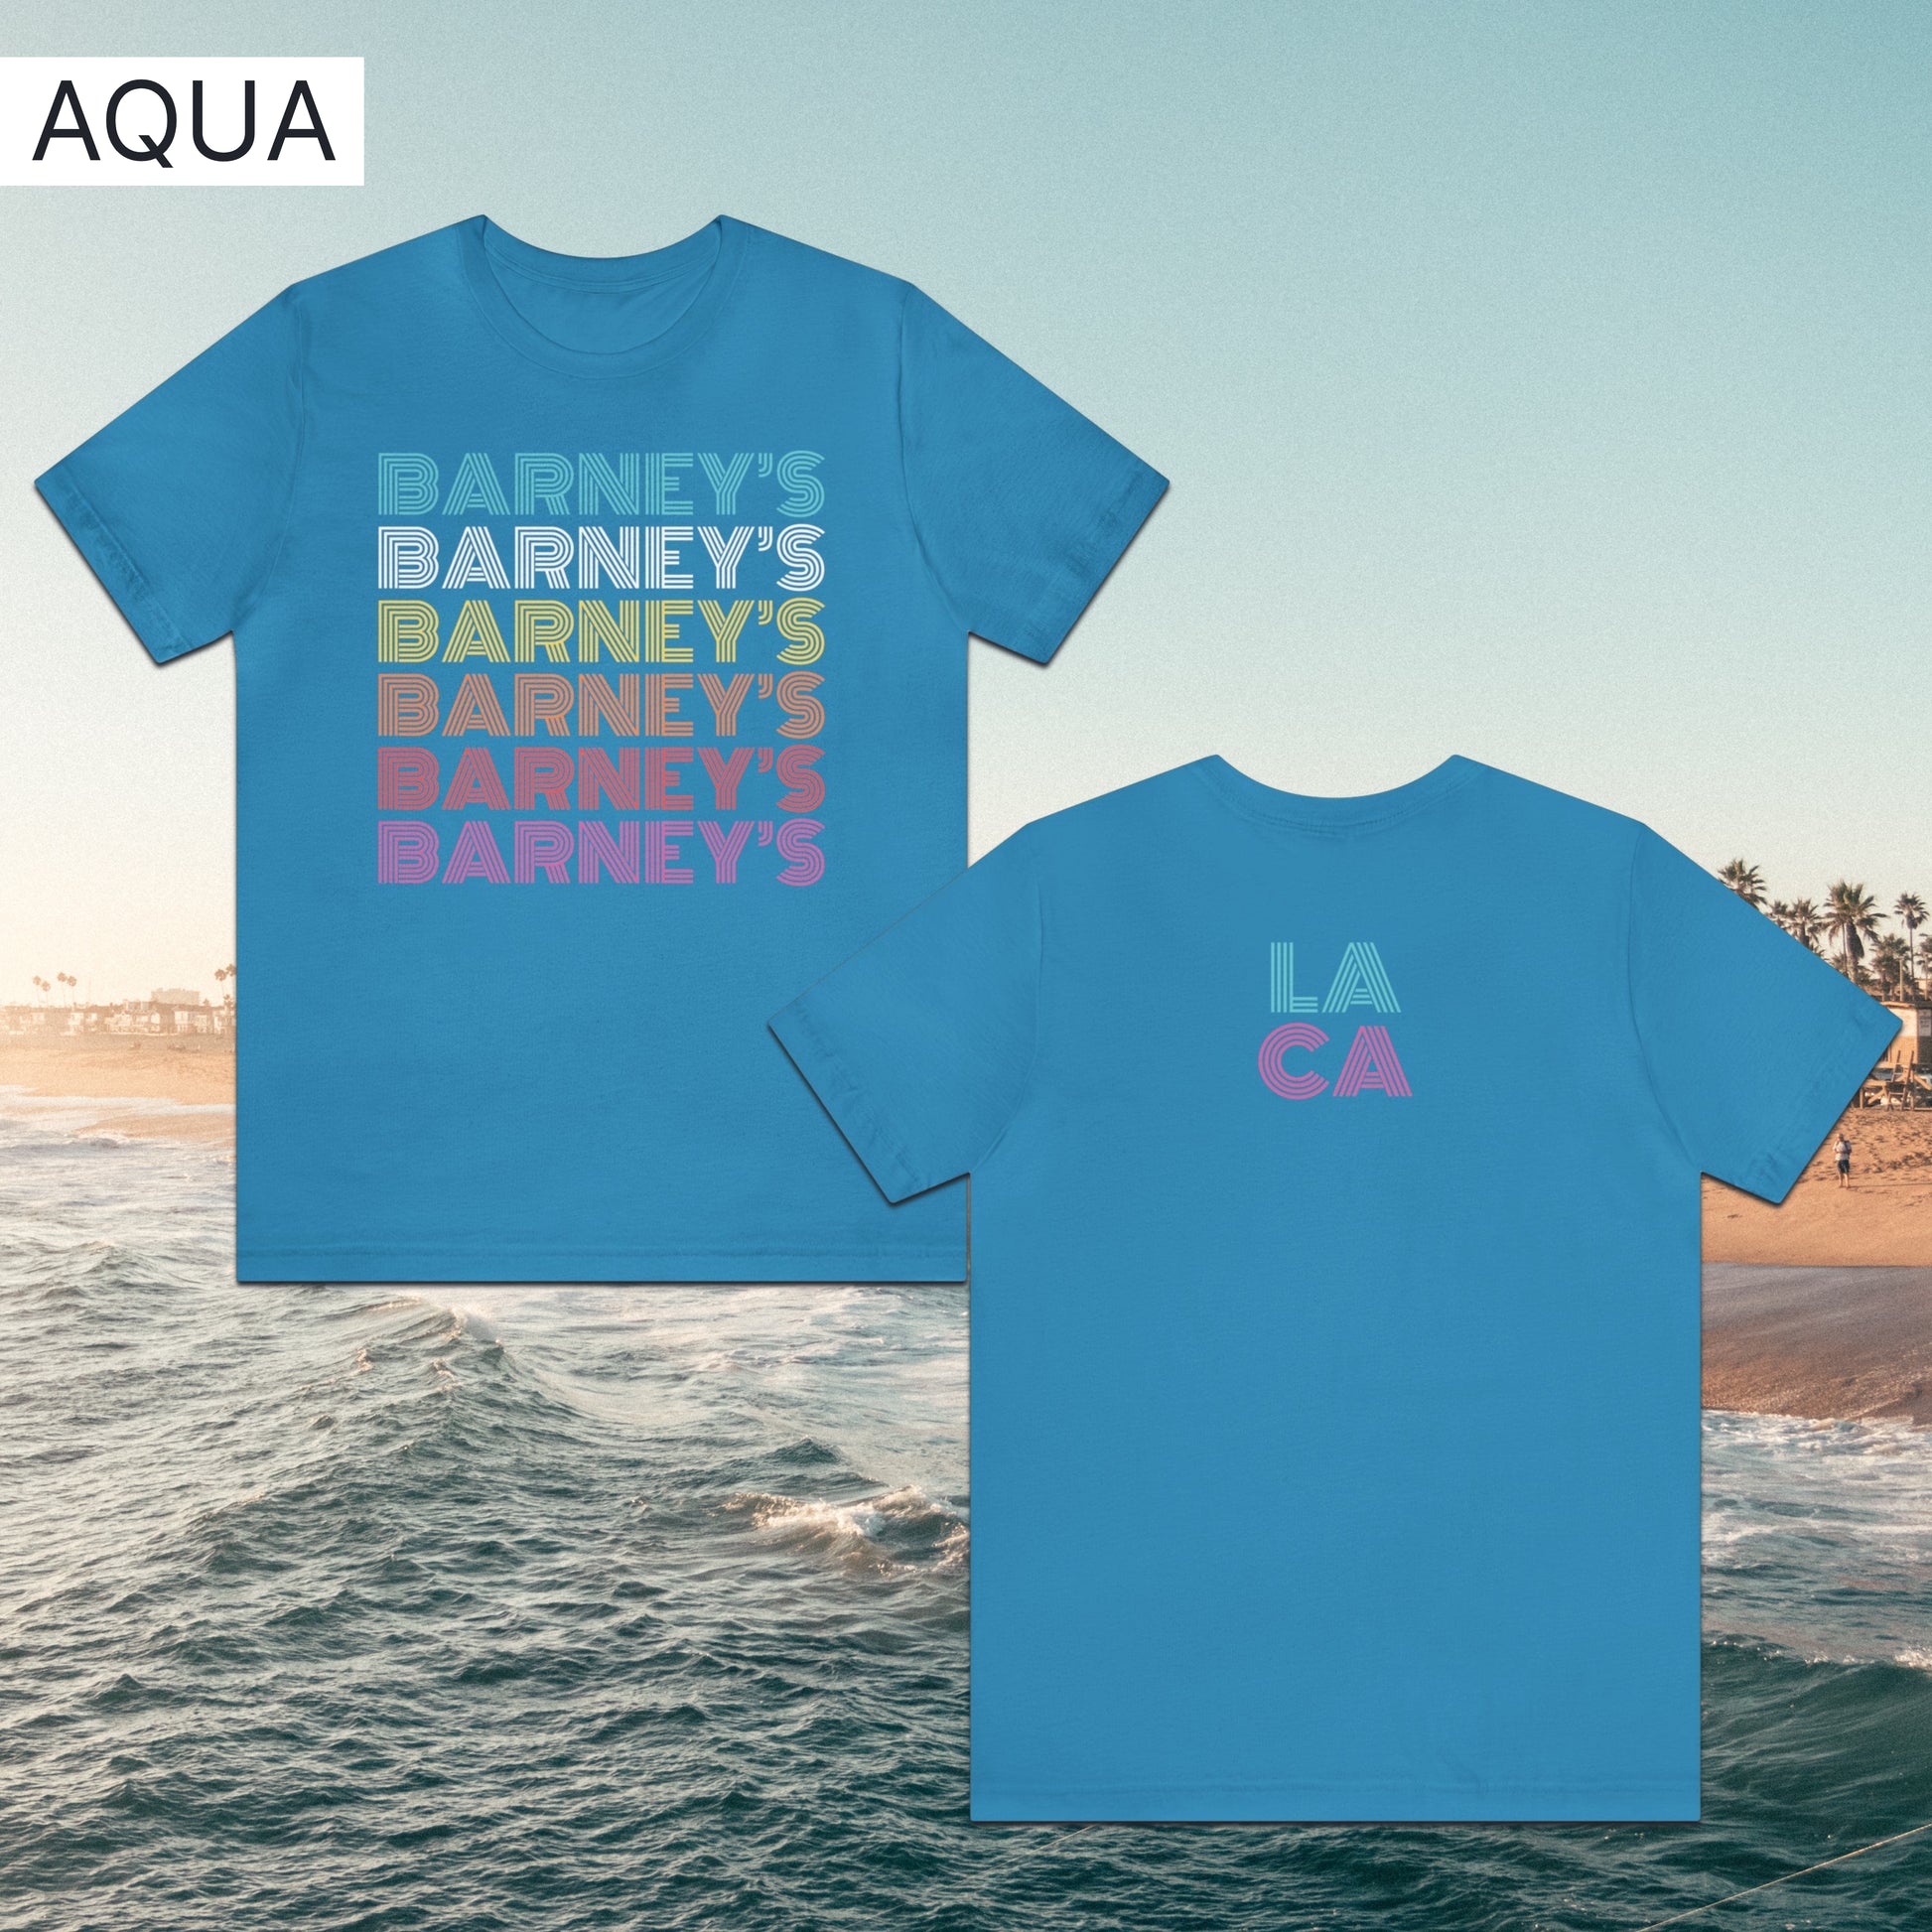 Barney's x6 Retro Hollywood | BARNEY'S BEANERY - Men's Retro Graphic Tee | Aqua Bella+Canvas 3001 T-Shirt - Front And Back Flat Lay View